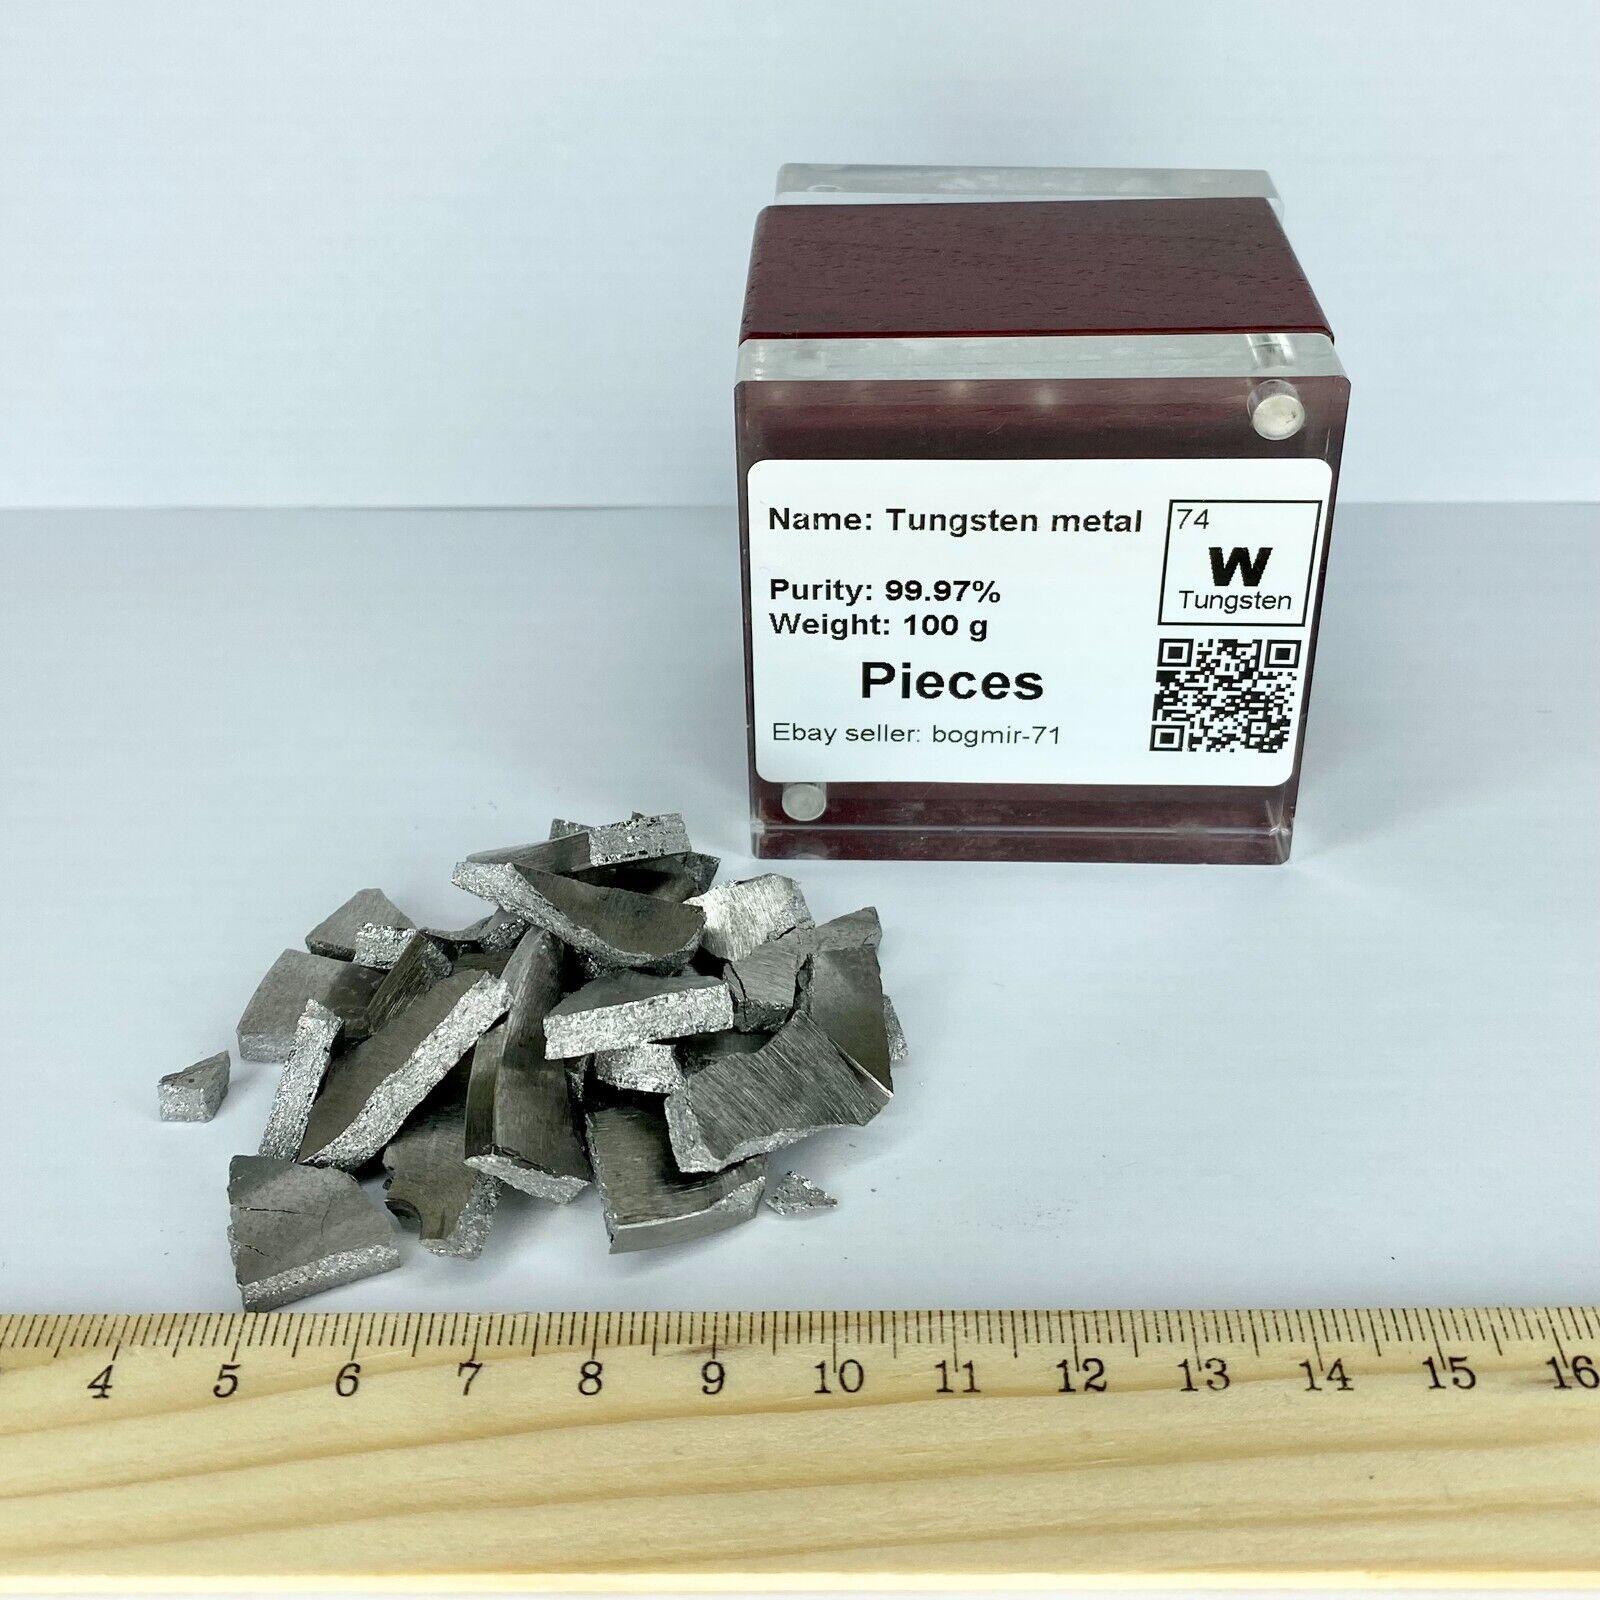 Tungsten Metal Pieces 100 g W/TREM 99.97% Purity Element Periodic Table